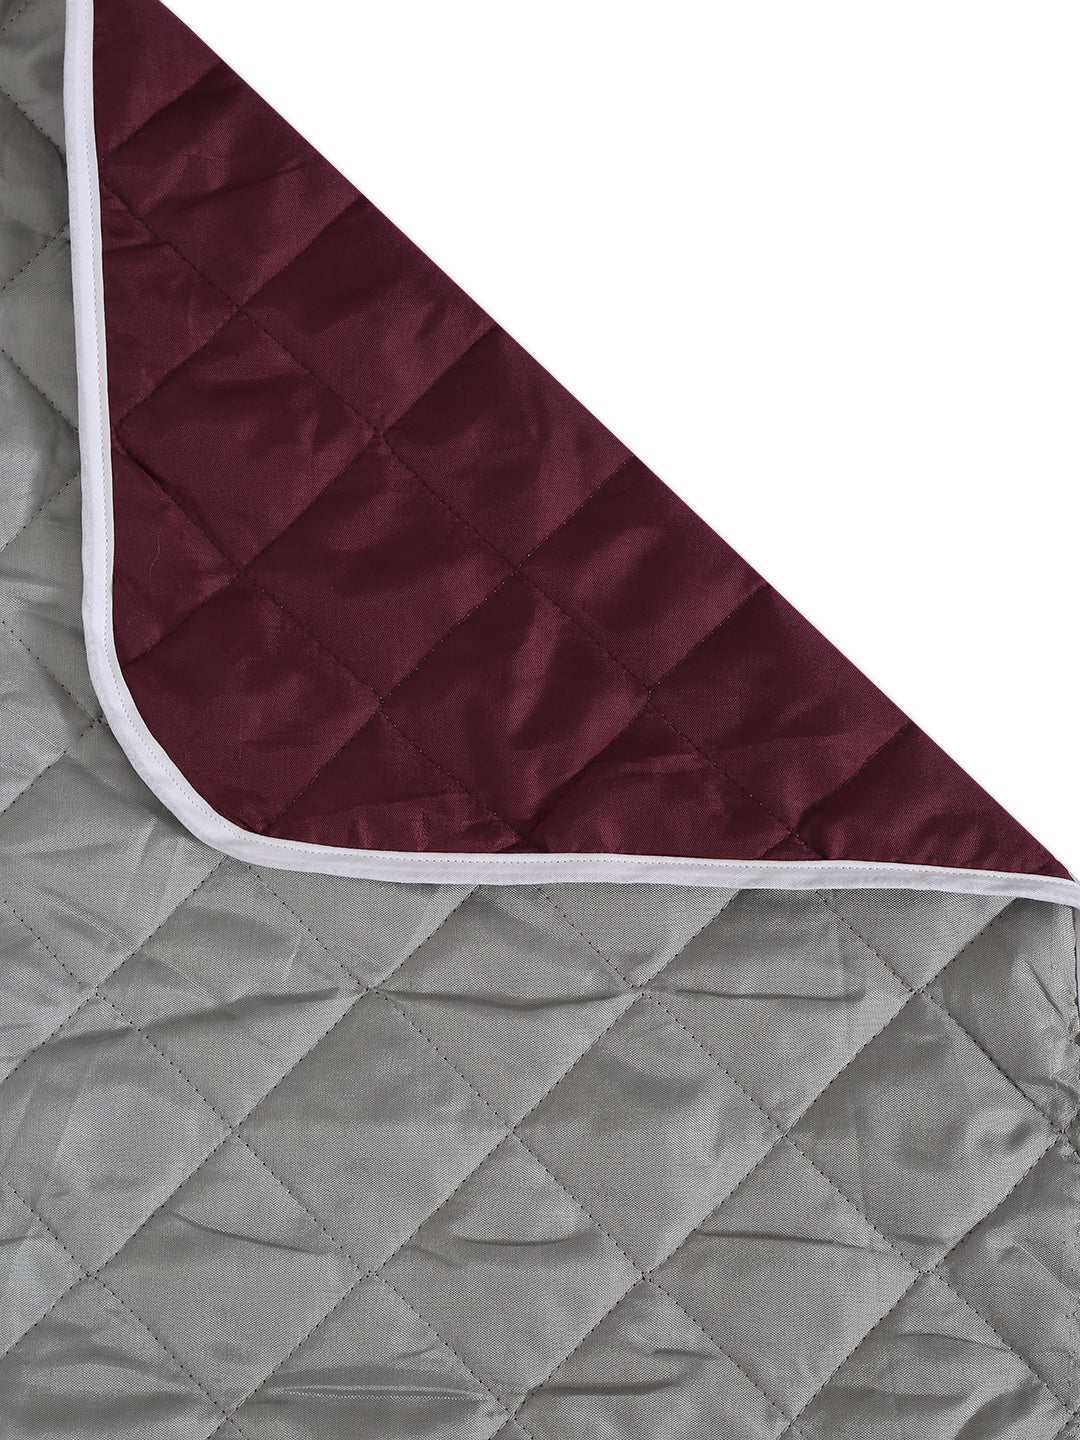 Reversible Quilted Polyester Solid Sofa Cover 1 Seater- Maroon & Grey